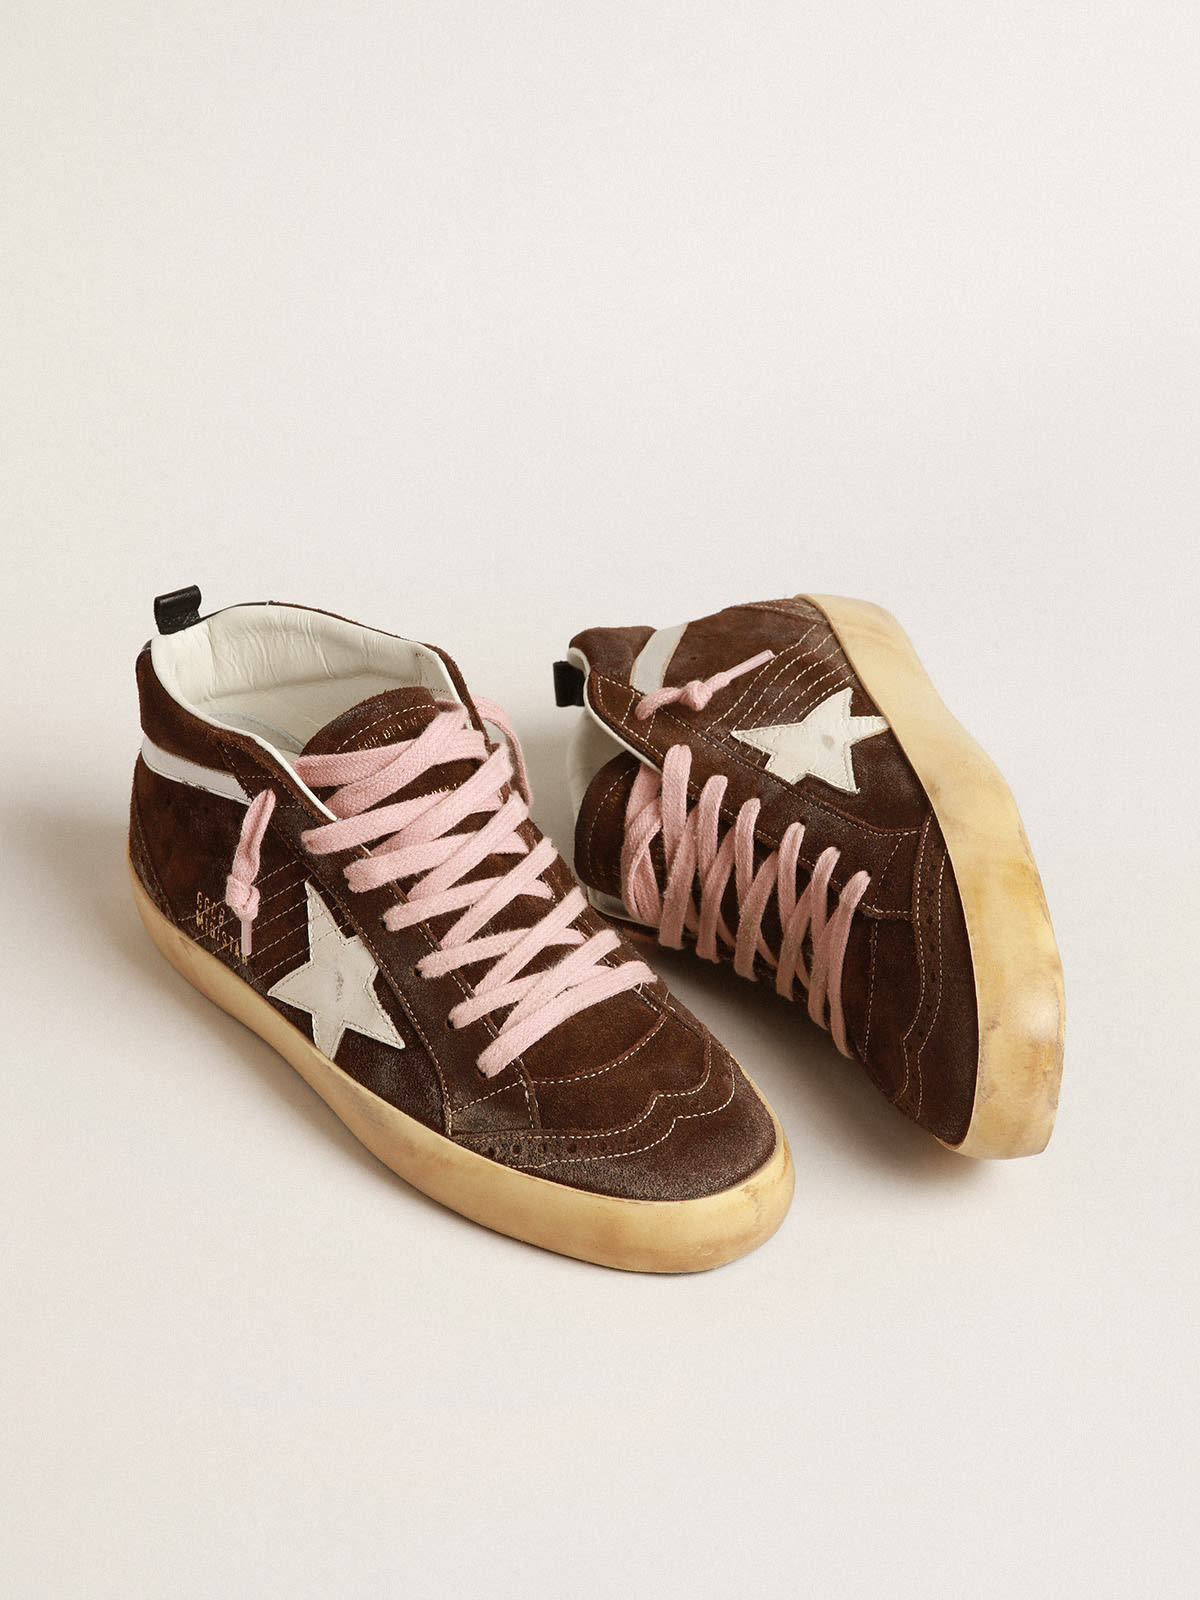 Golden Goose - Mid Star in brown suede with white leather star in 